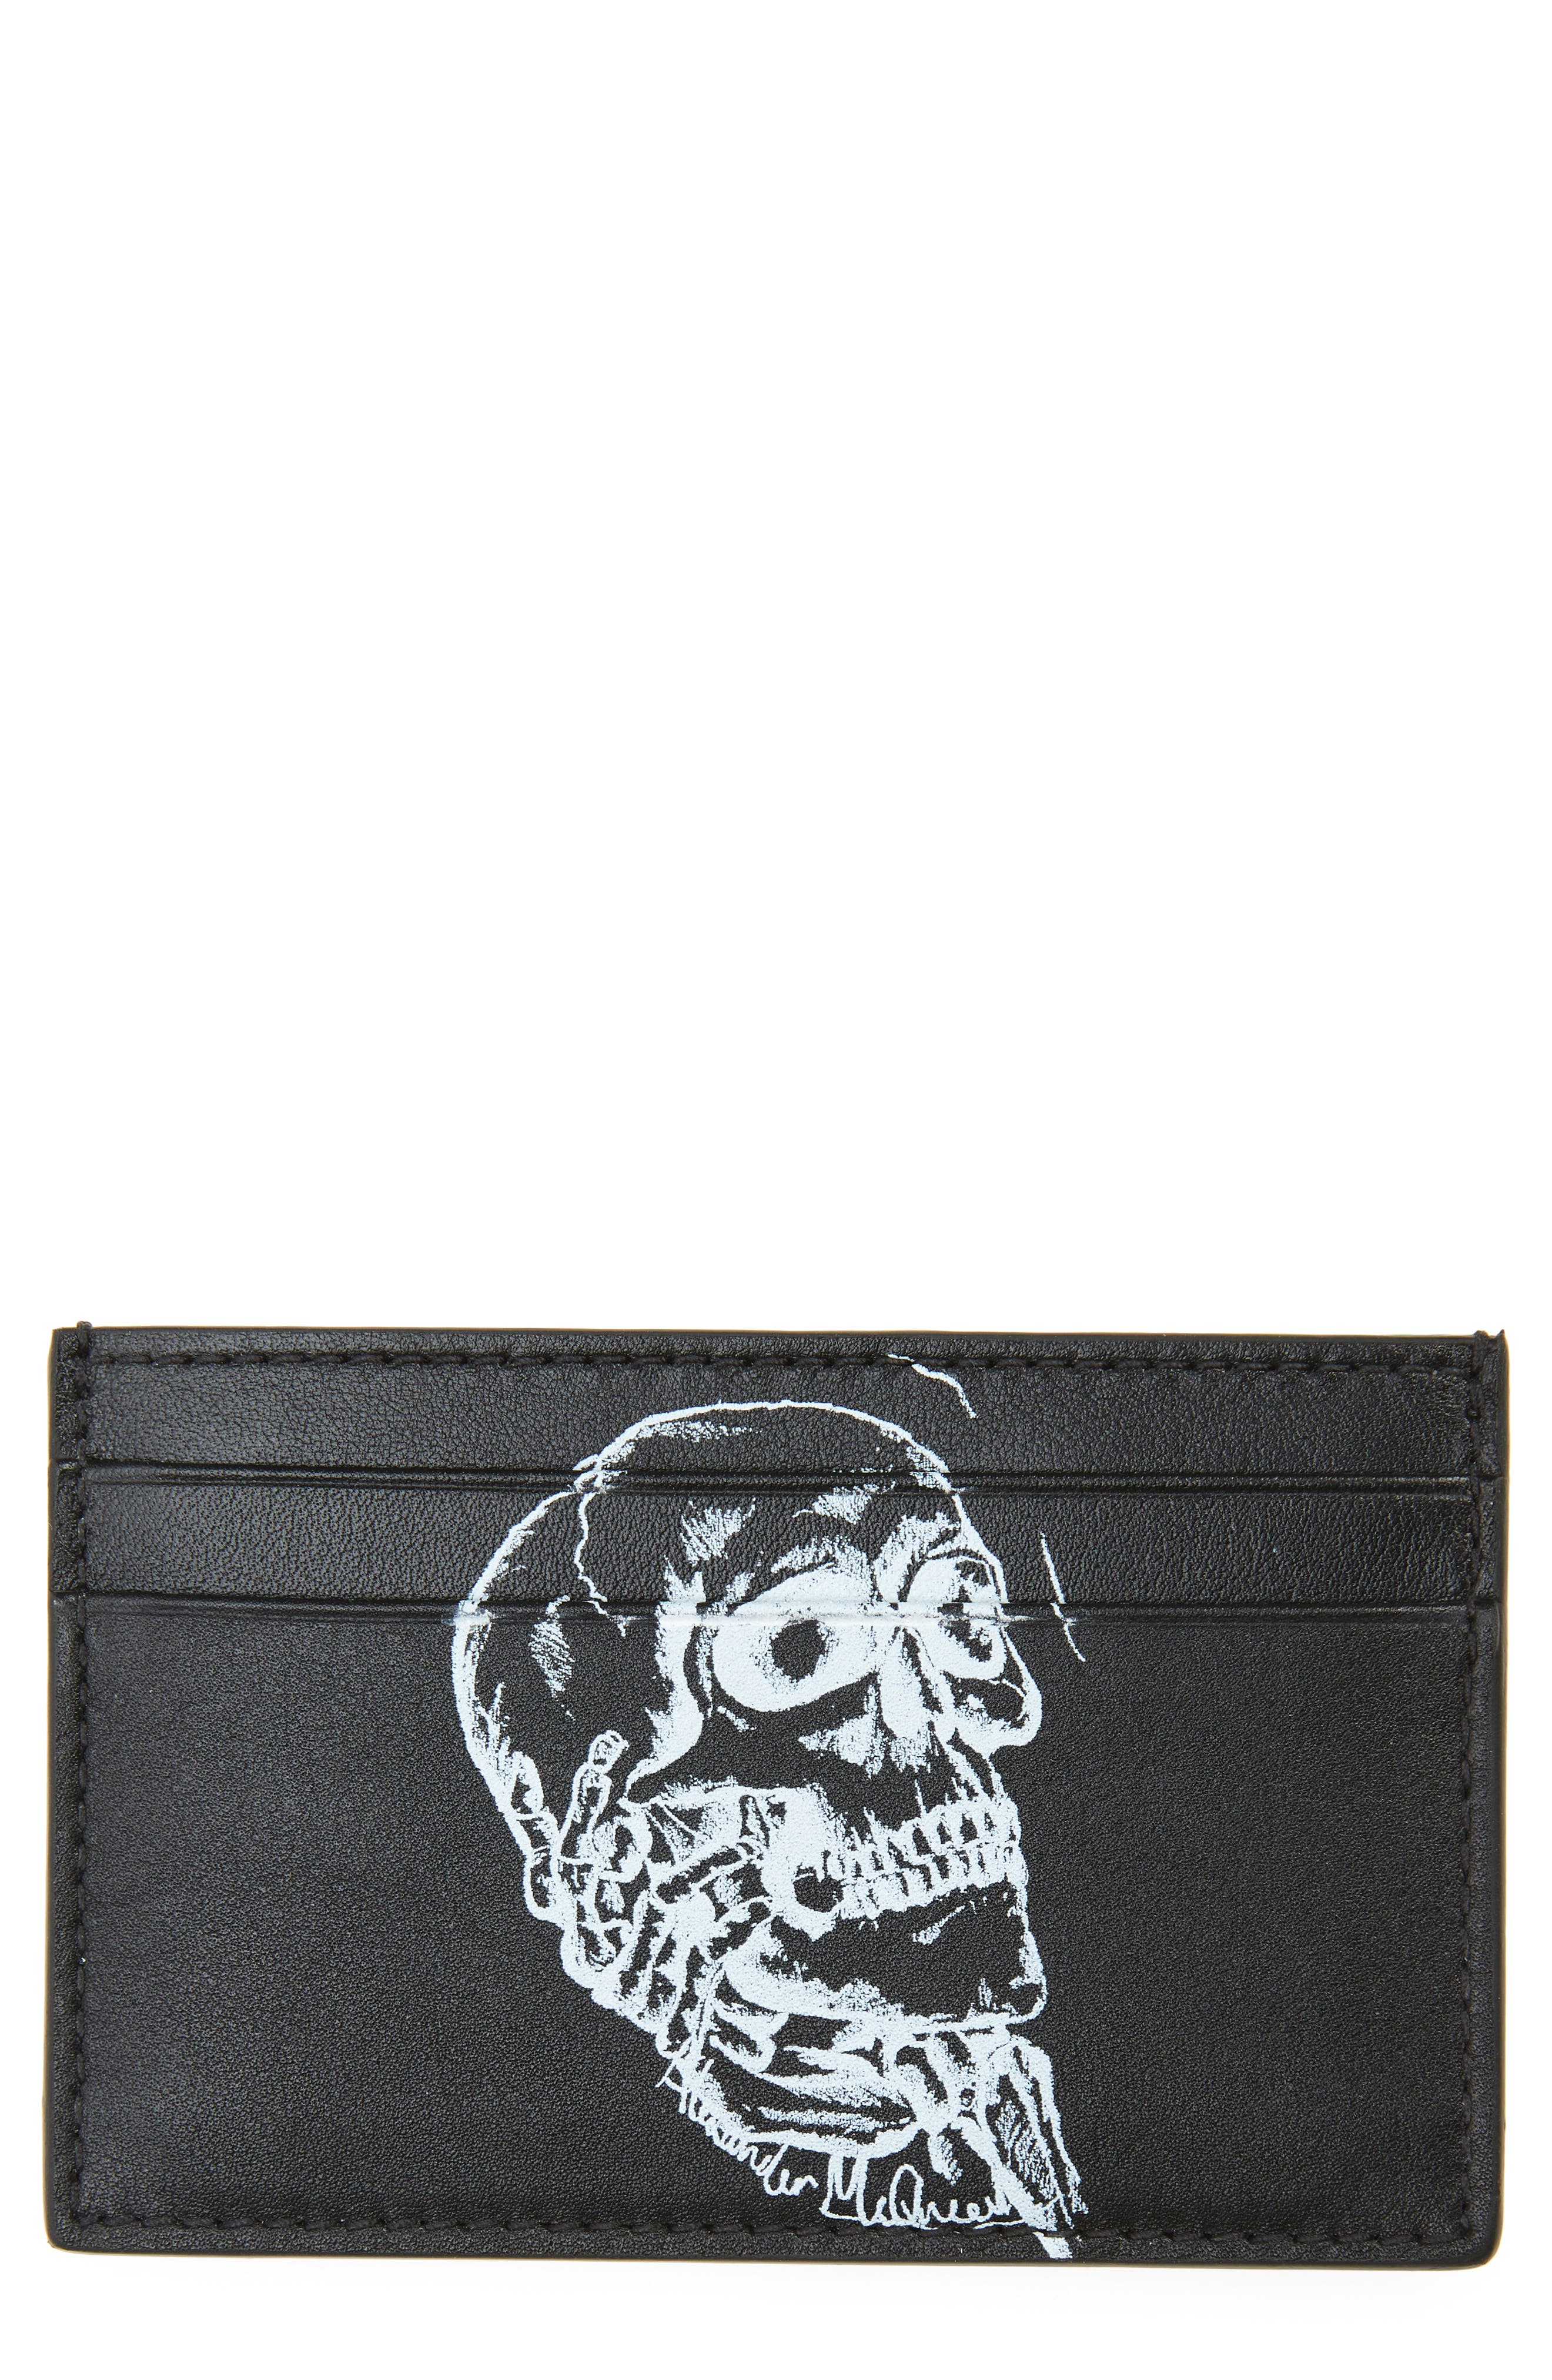 Alexander McQueen Large Skull Leather Card Case in Black/White at Nordstrom